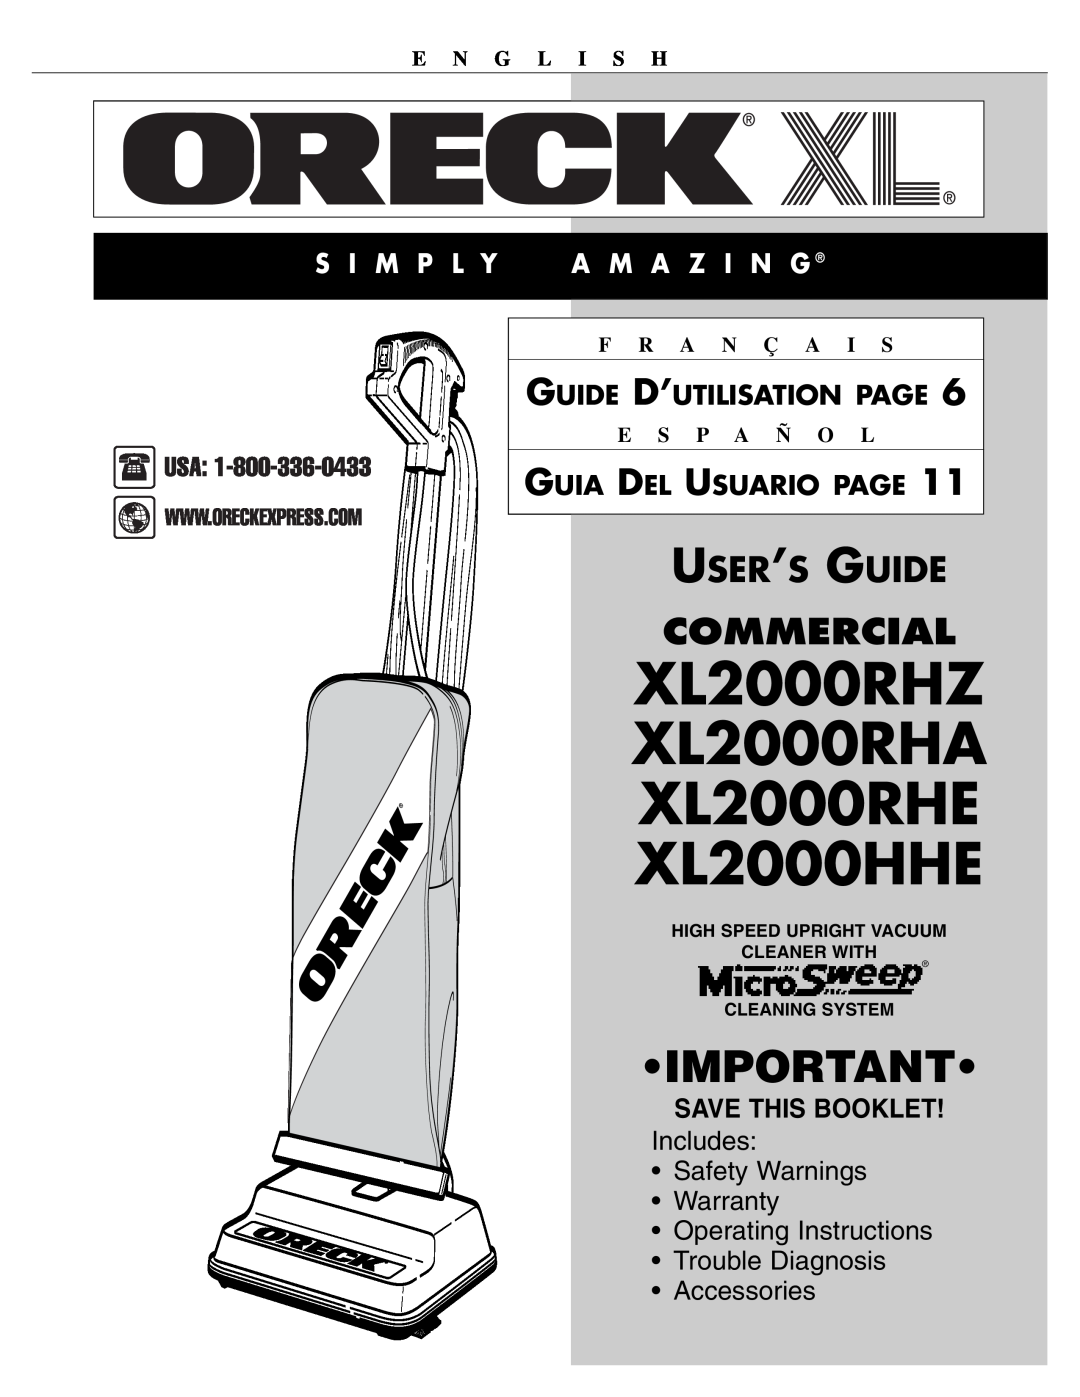 Oreck XL2000HHE warranty Save This Booklet, E N G L I S H, F R A N Ç A I S, E S P A Ñ O L, Commercial, User’S Guide 